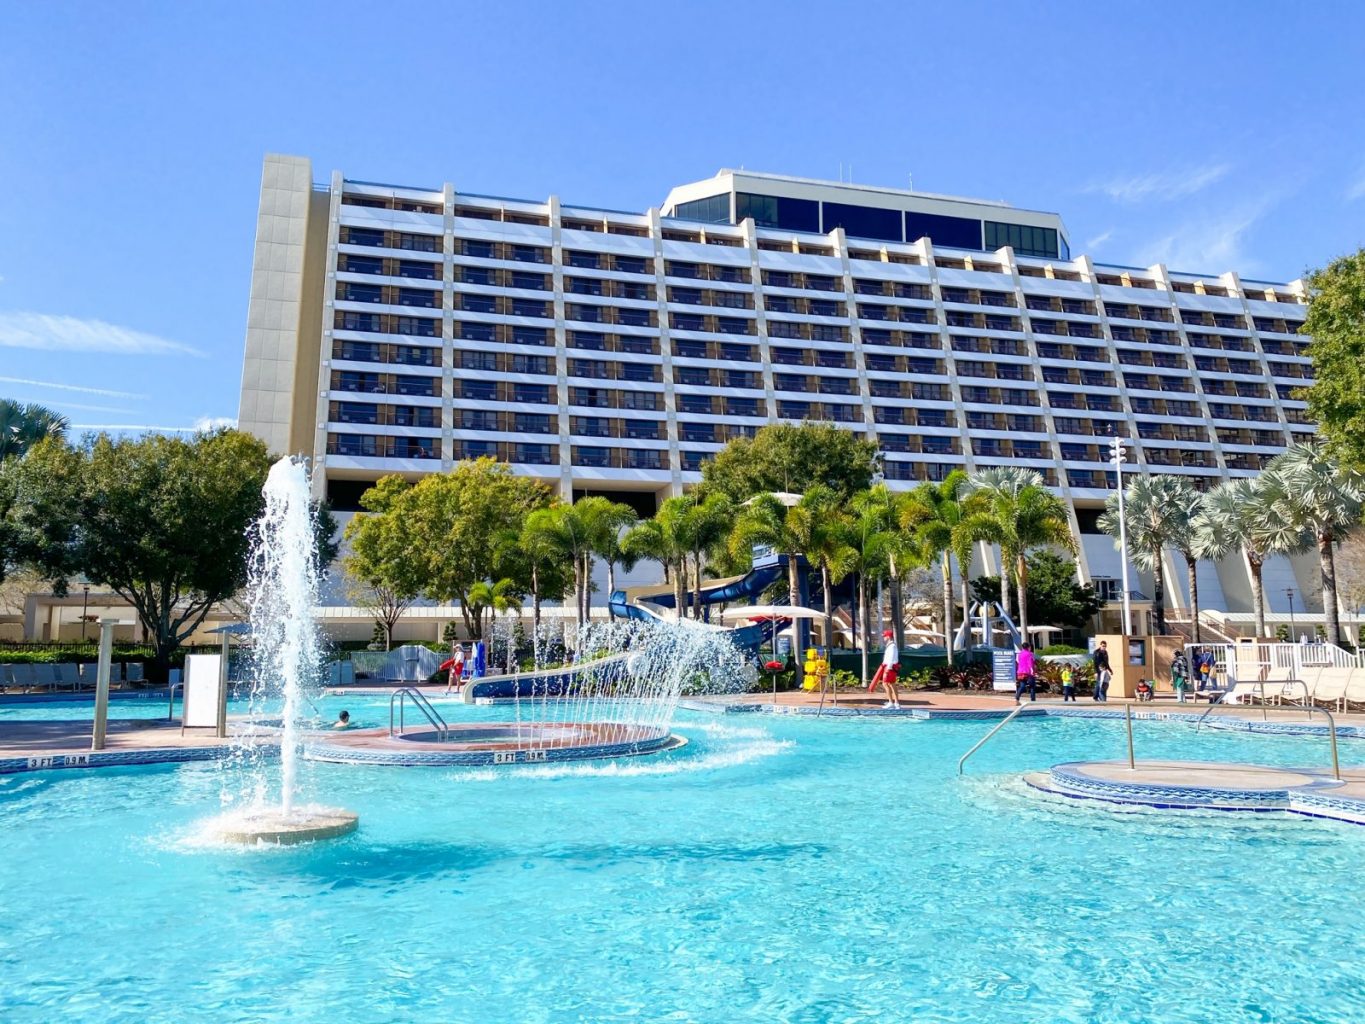 view of the water features in the Contemporary Resort pool